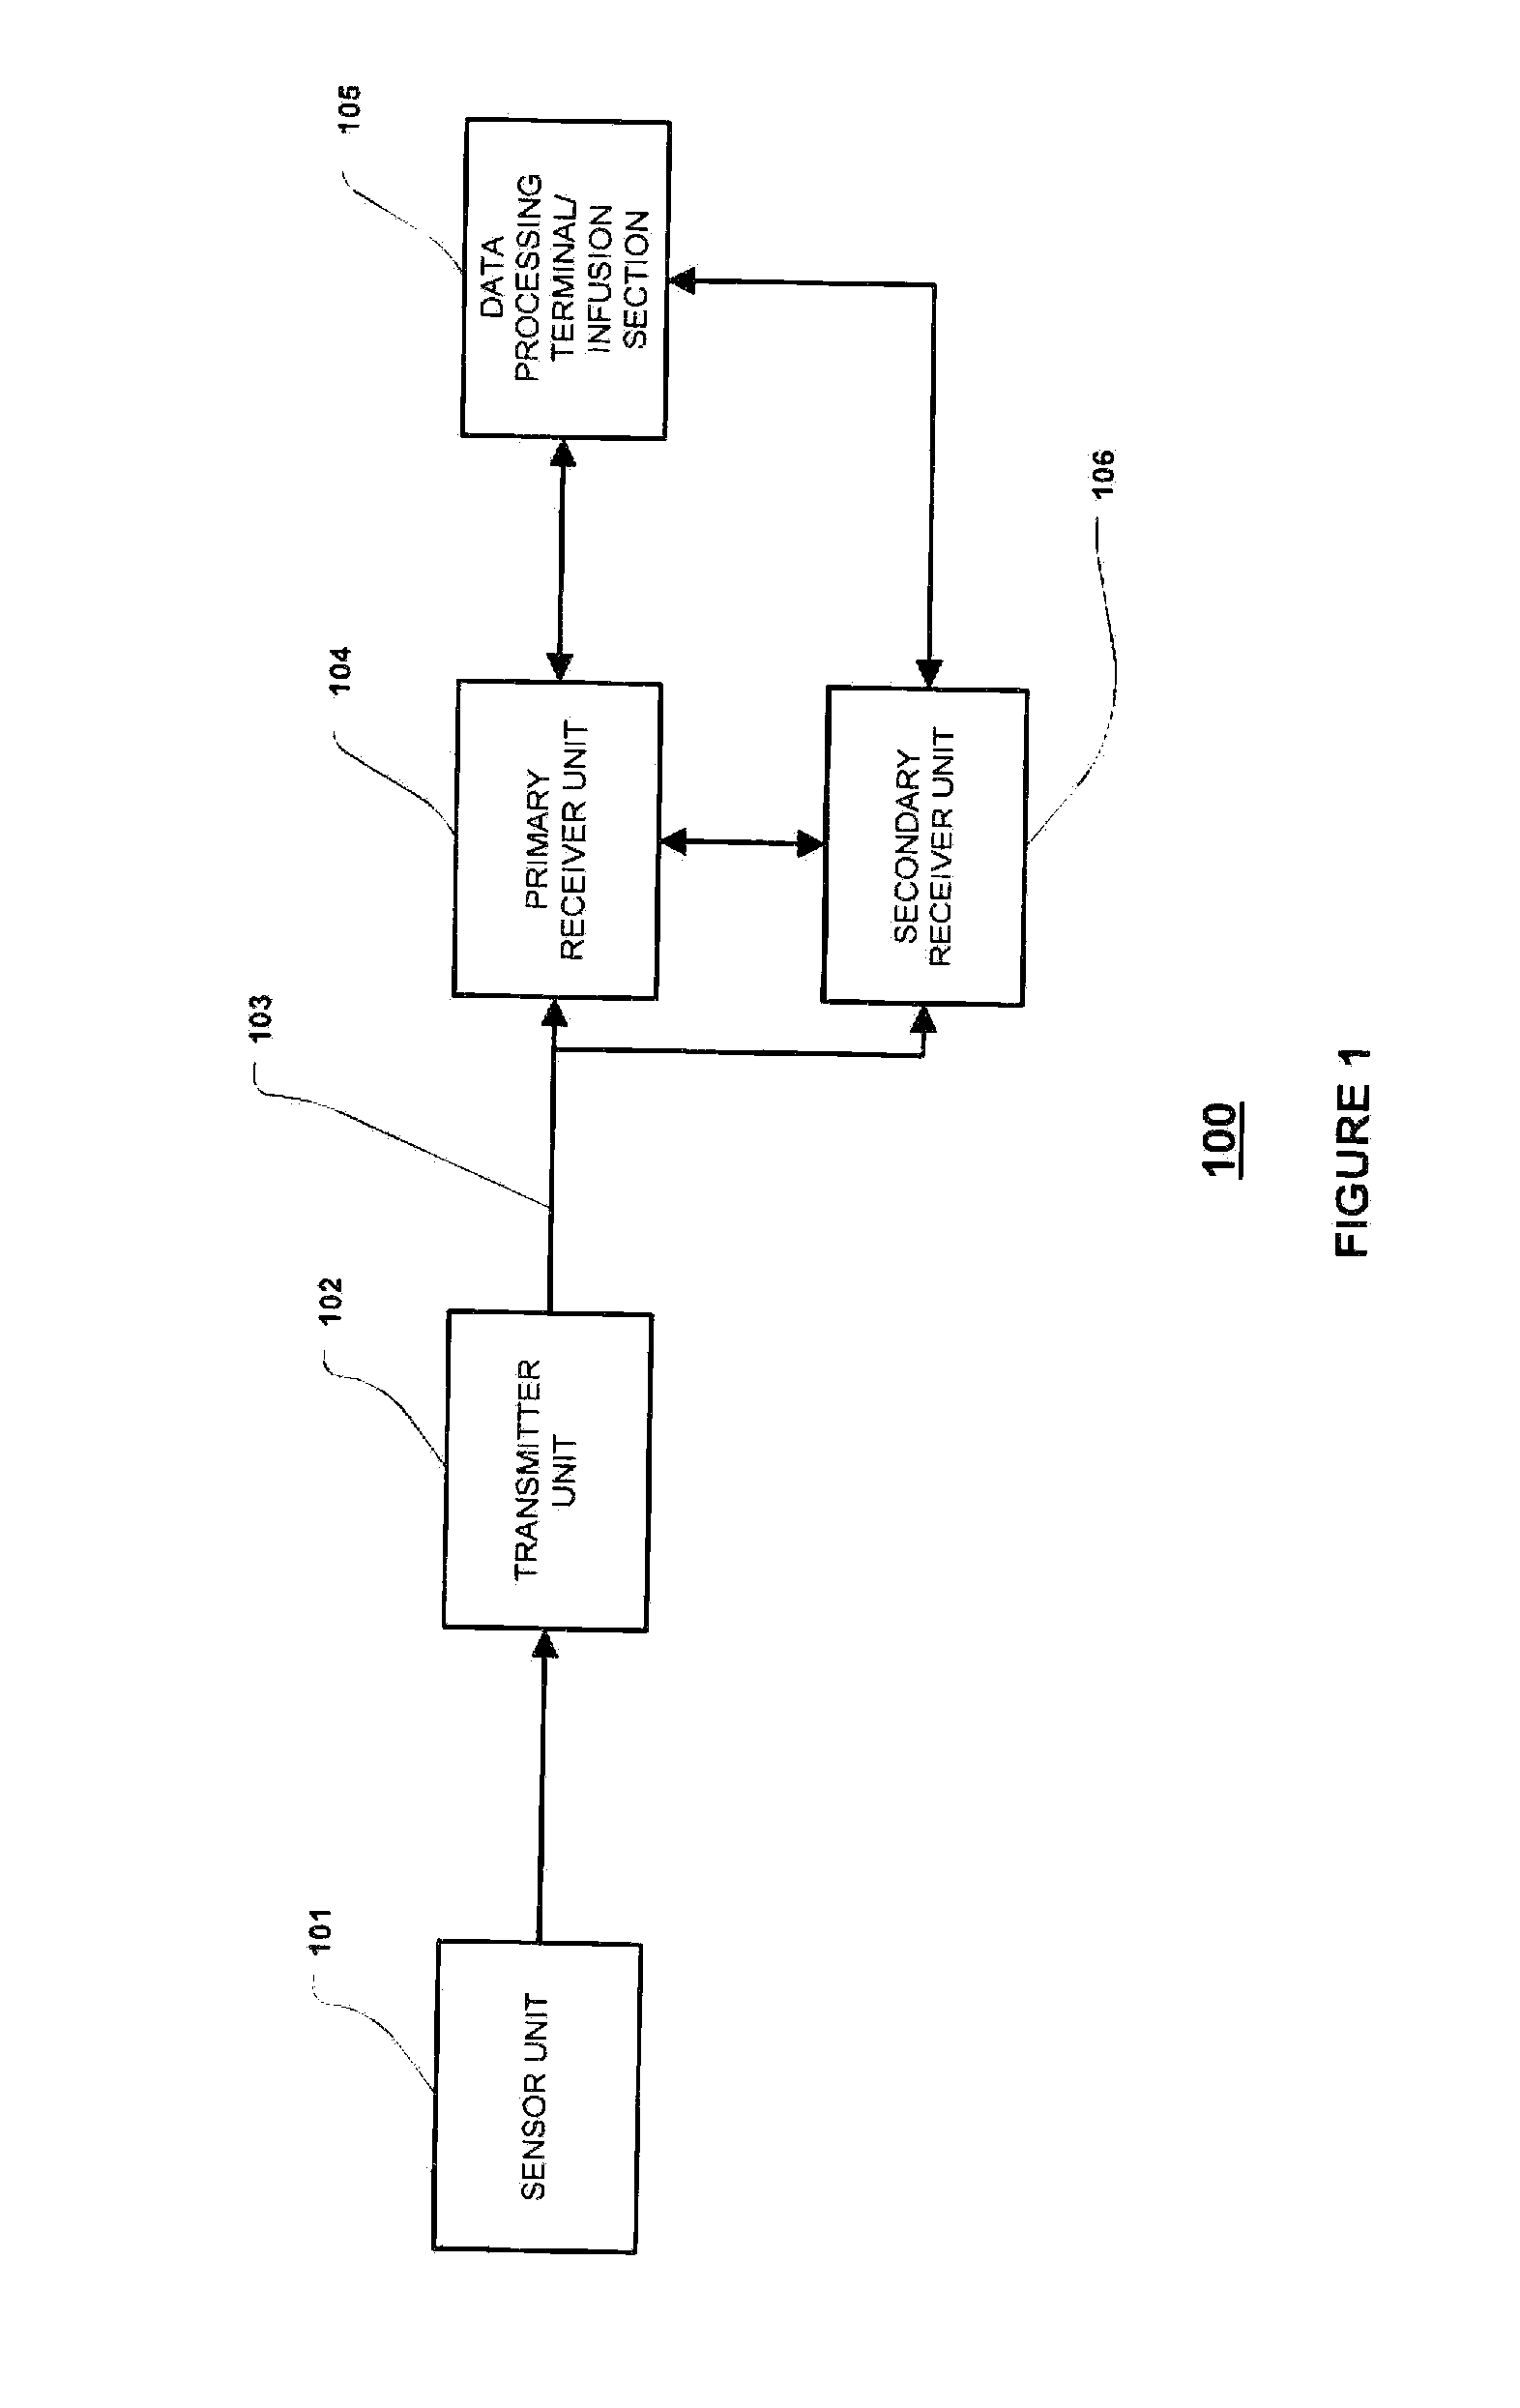 Method and System for Dynamically Updating Calibration Parameters for an Analyte Sensor